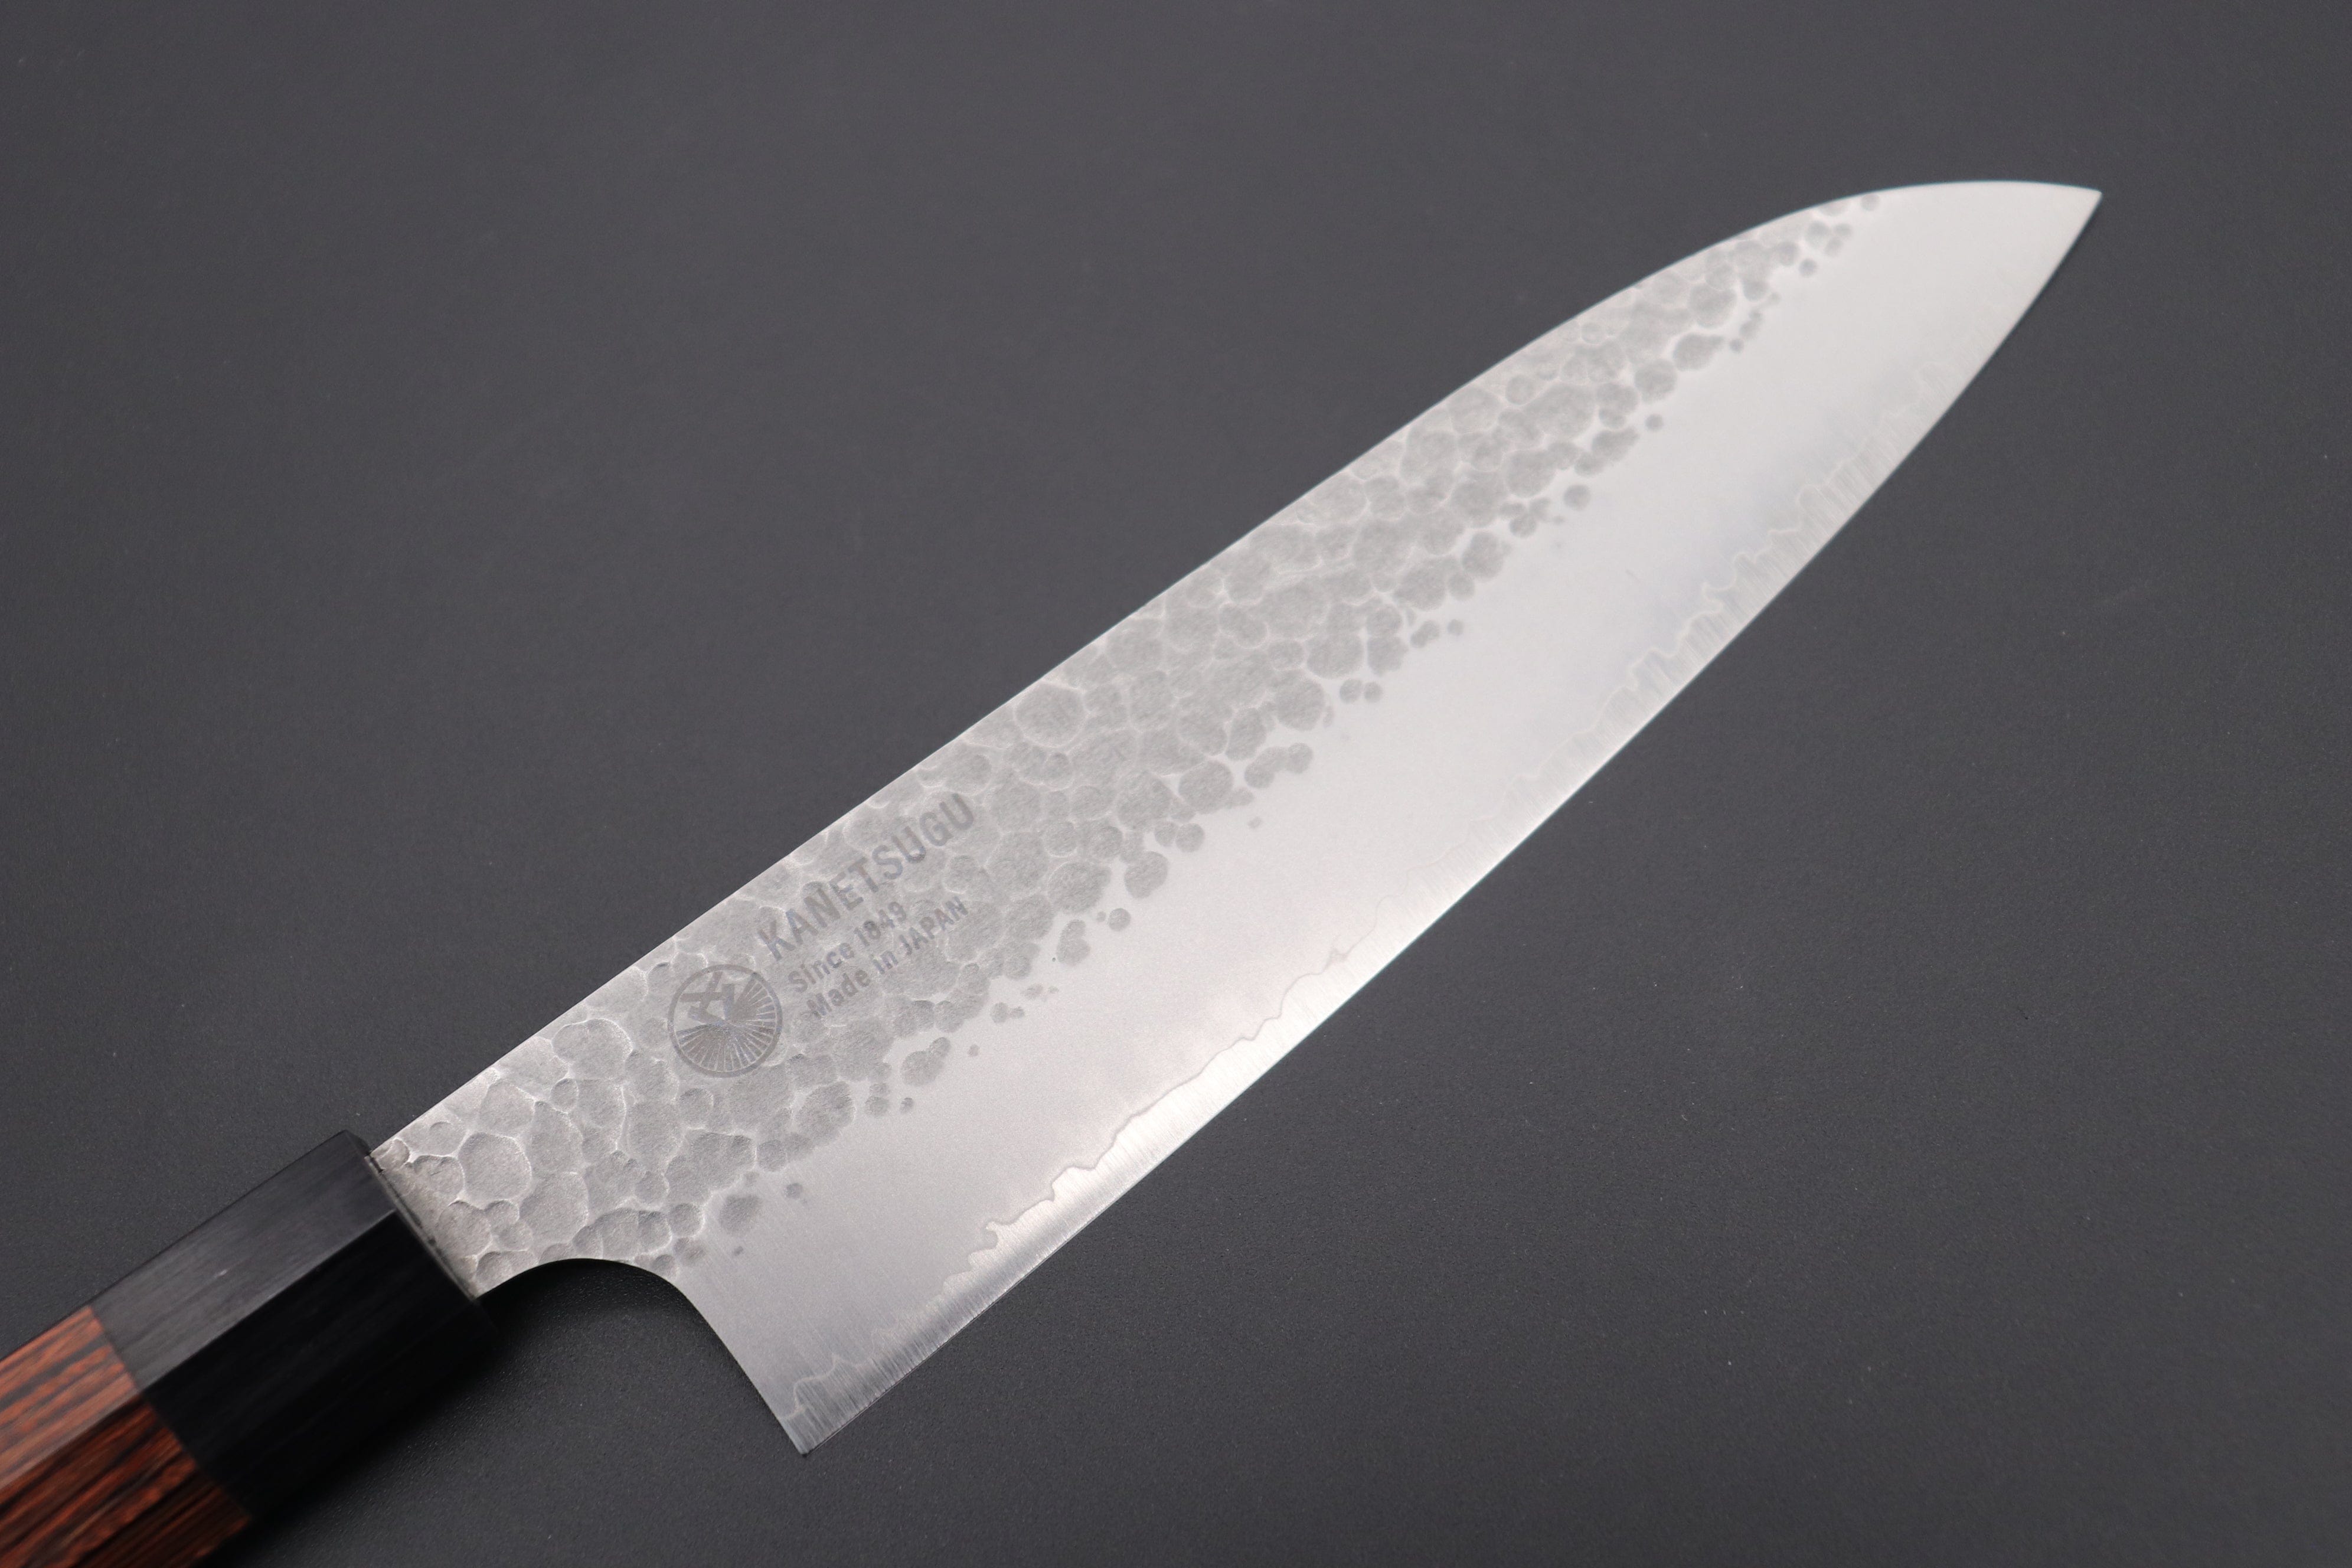 Order 6 Classic Japanese Chef's Knife